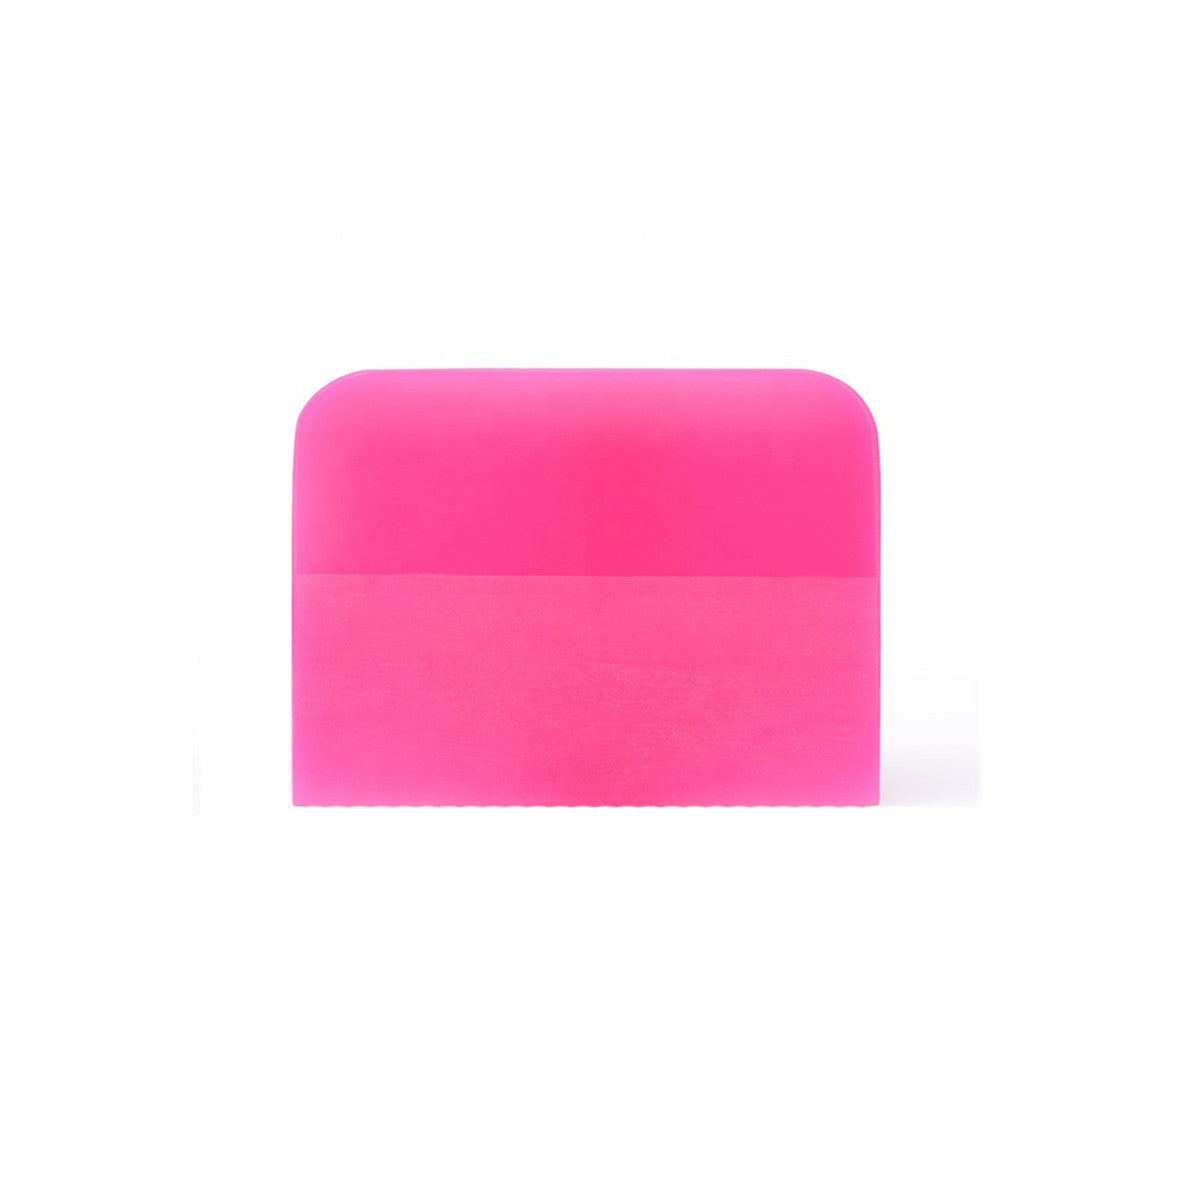  Pink Specialty Squeegee, glass cleaning